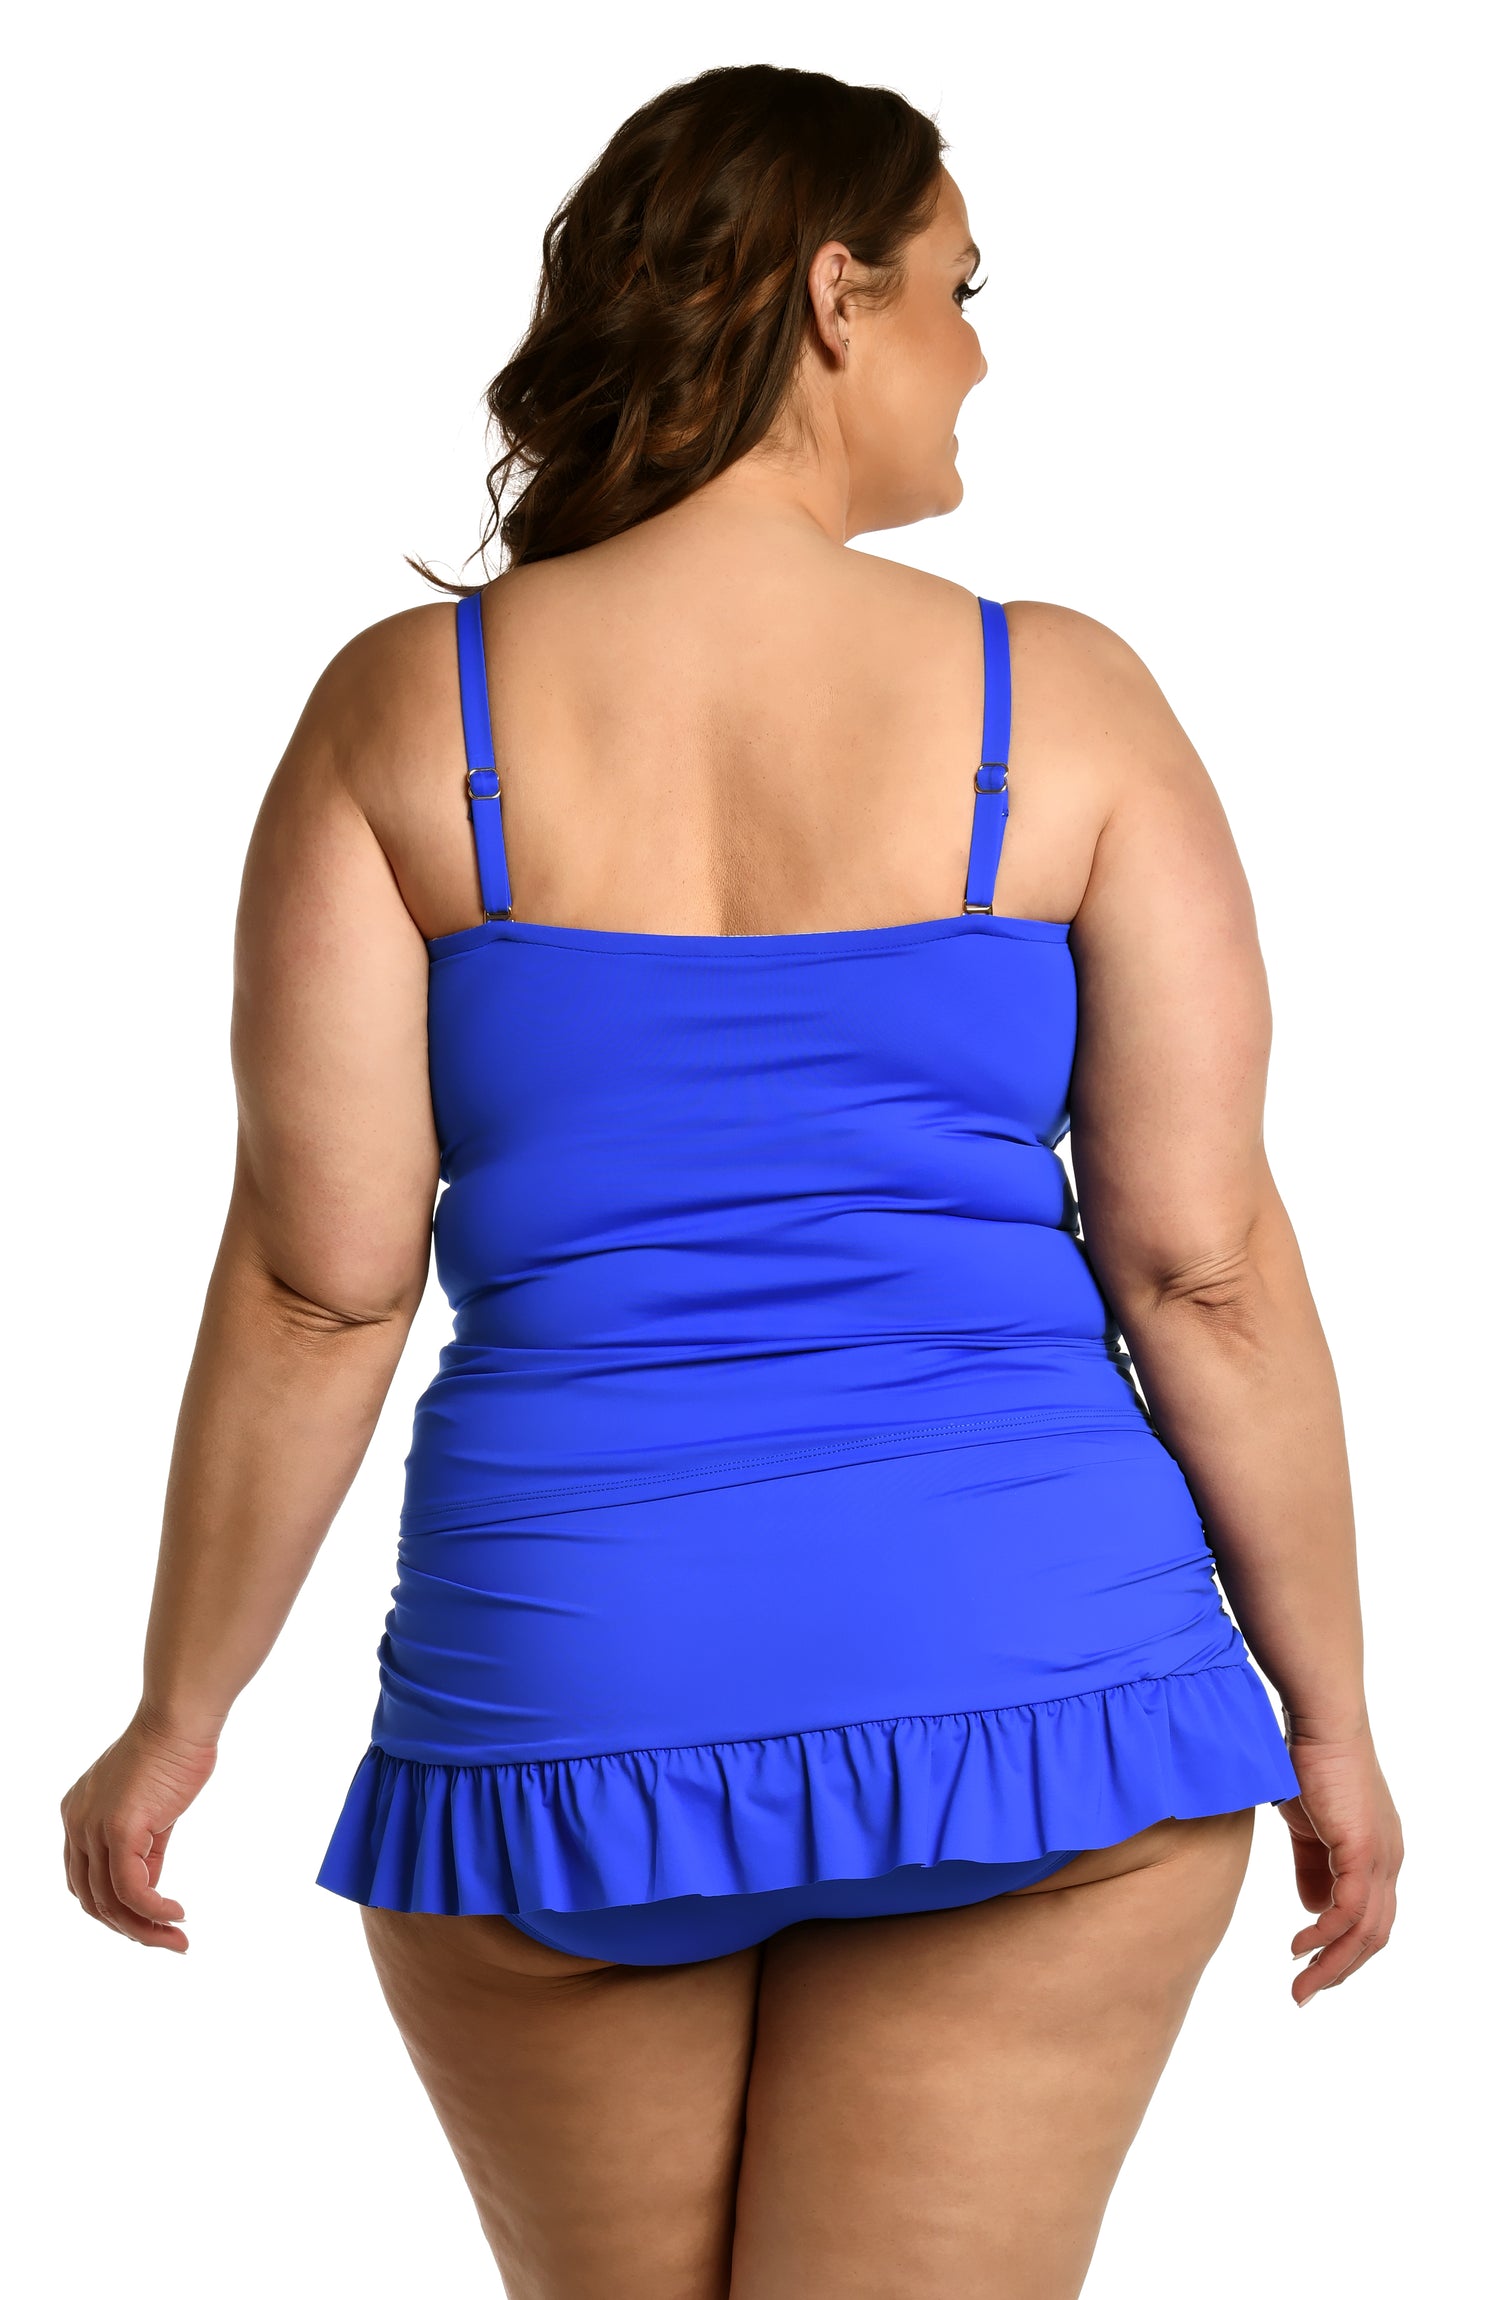 Model is wearing a sapphire colored bandeau tankini swimsuit top from our Best-Selling Island Goddess collection.